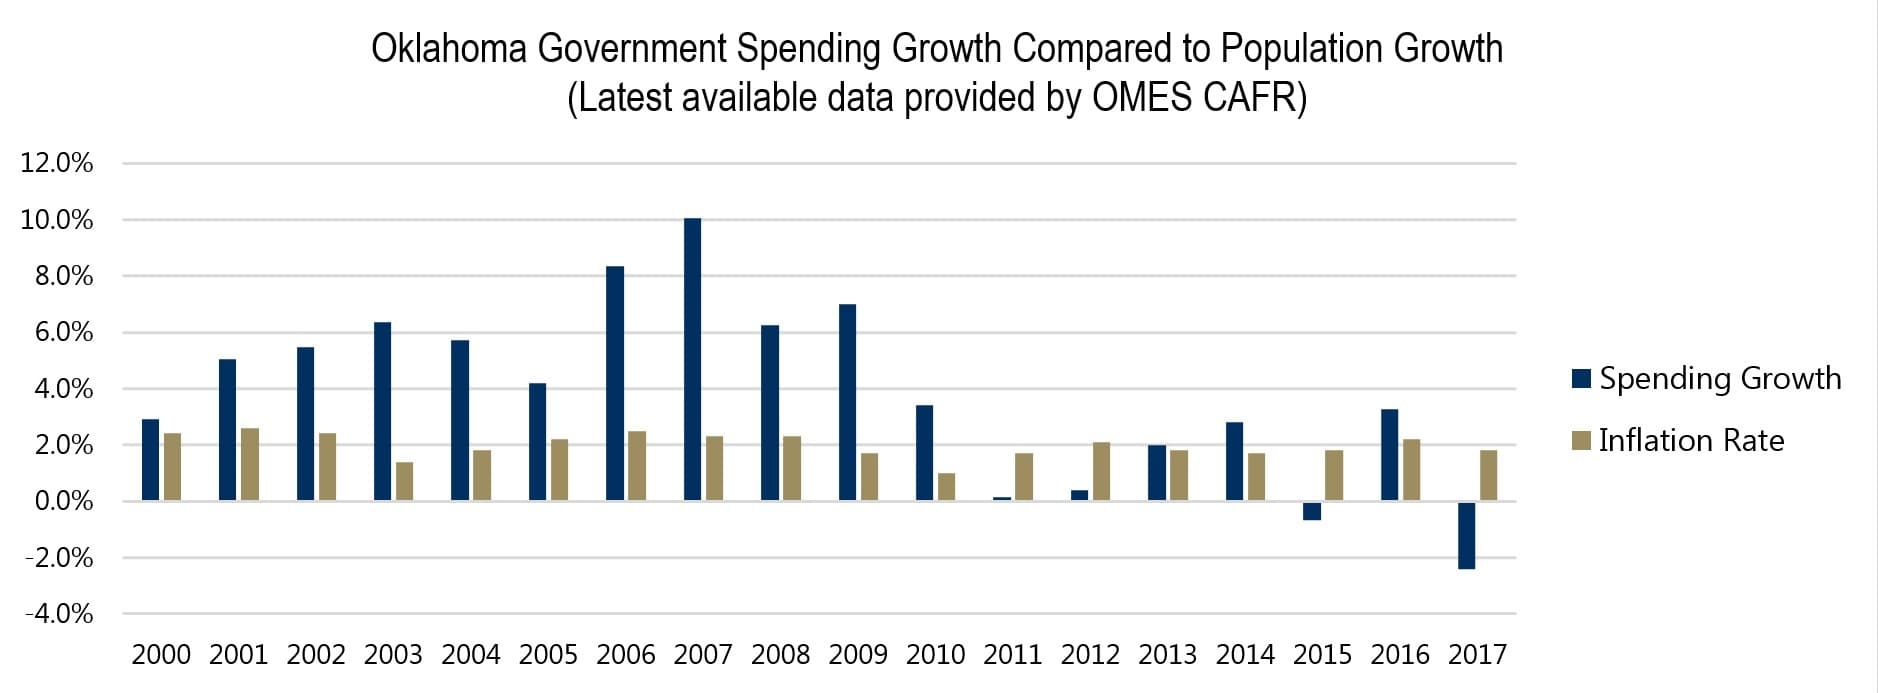 Oklahoma Government Spending Growth Compared to Population Growth